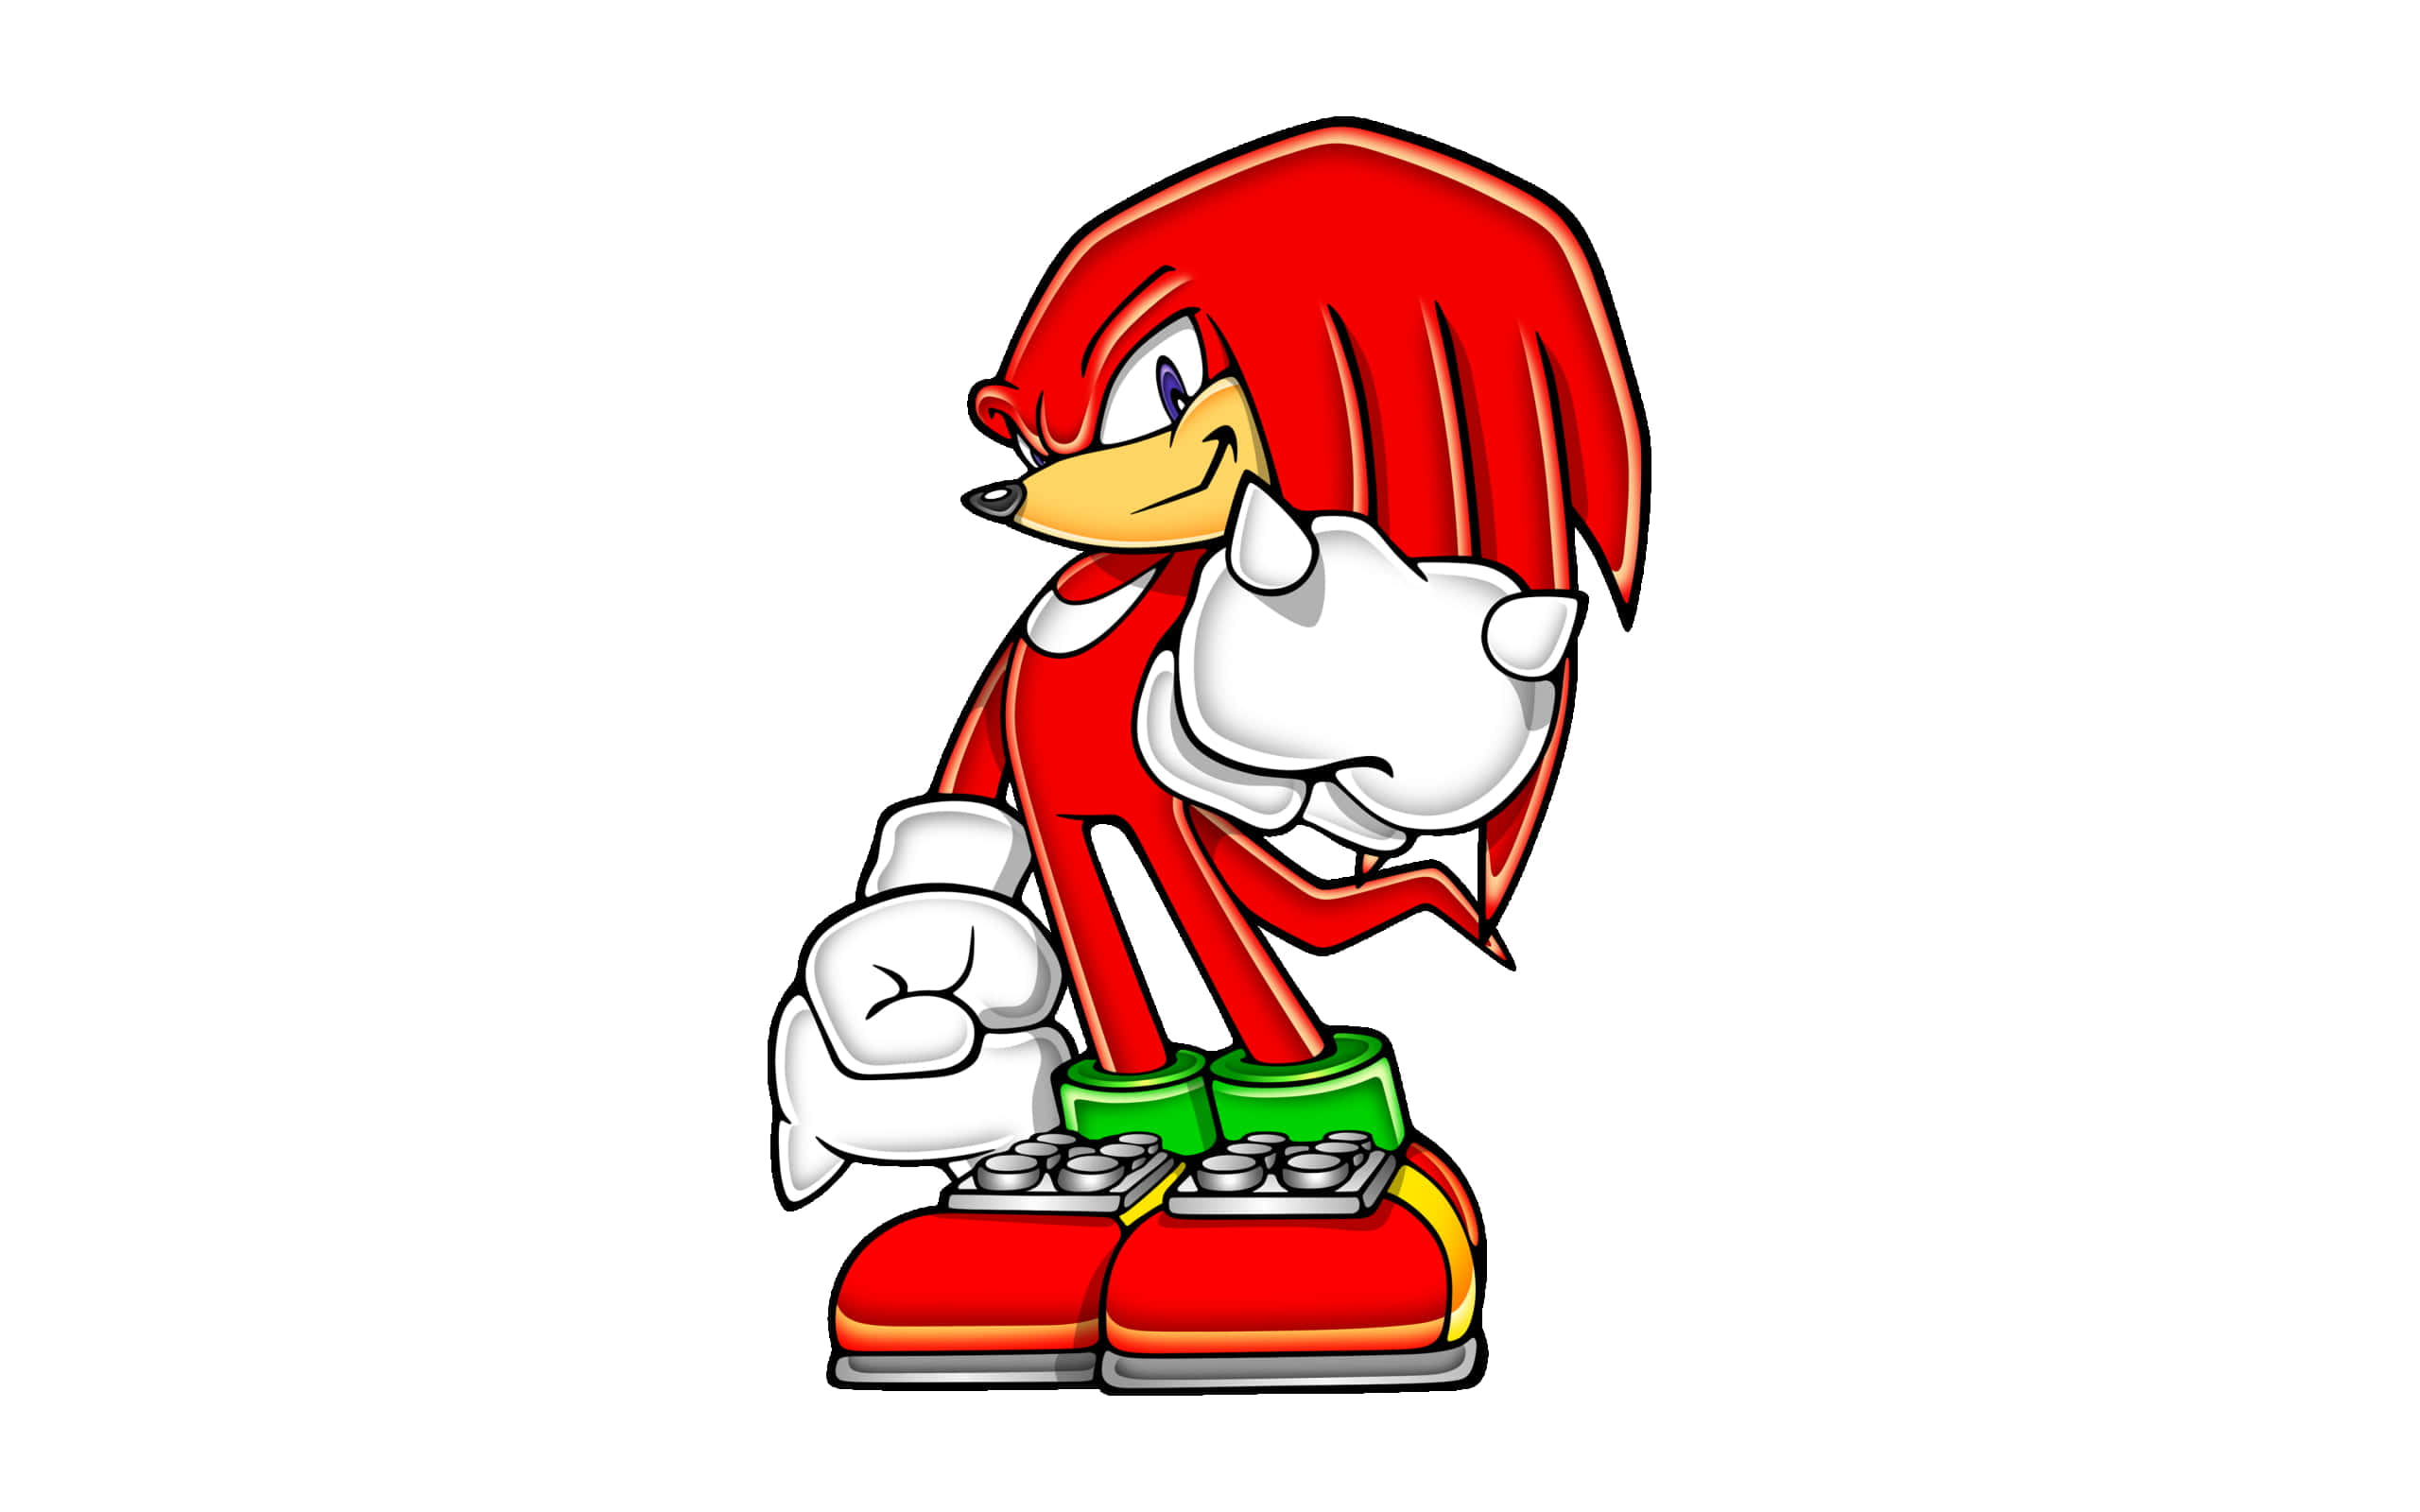 Sonic The Hedgehog Cartoon Character With Red Hair Wallpaper